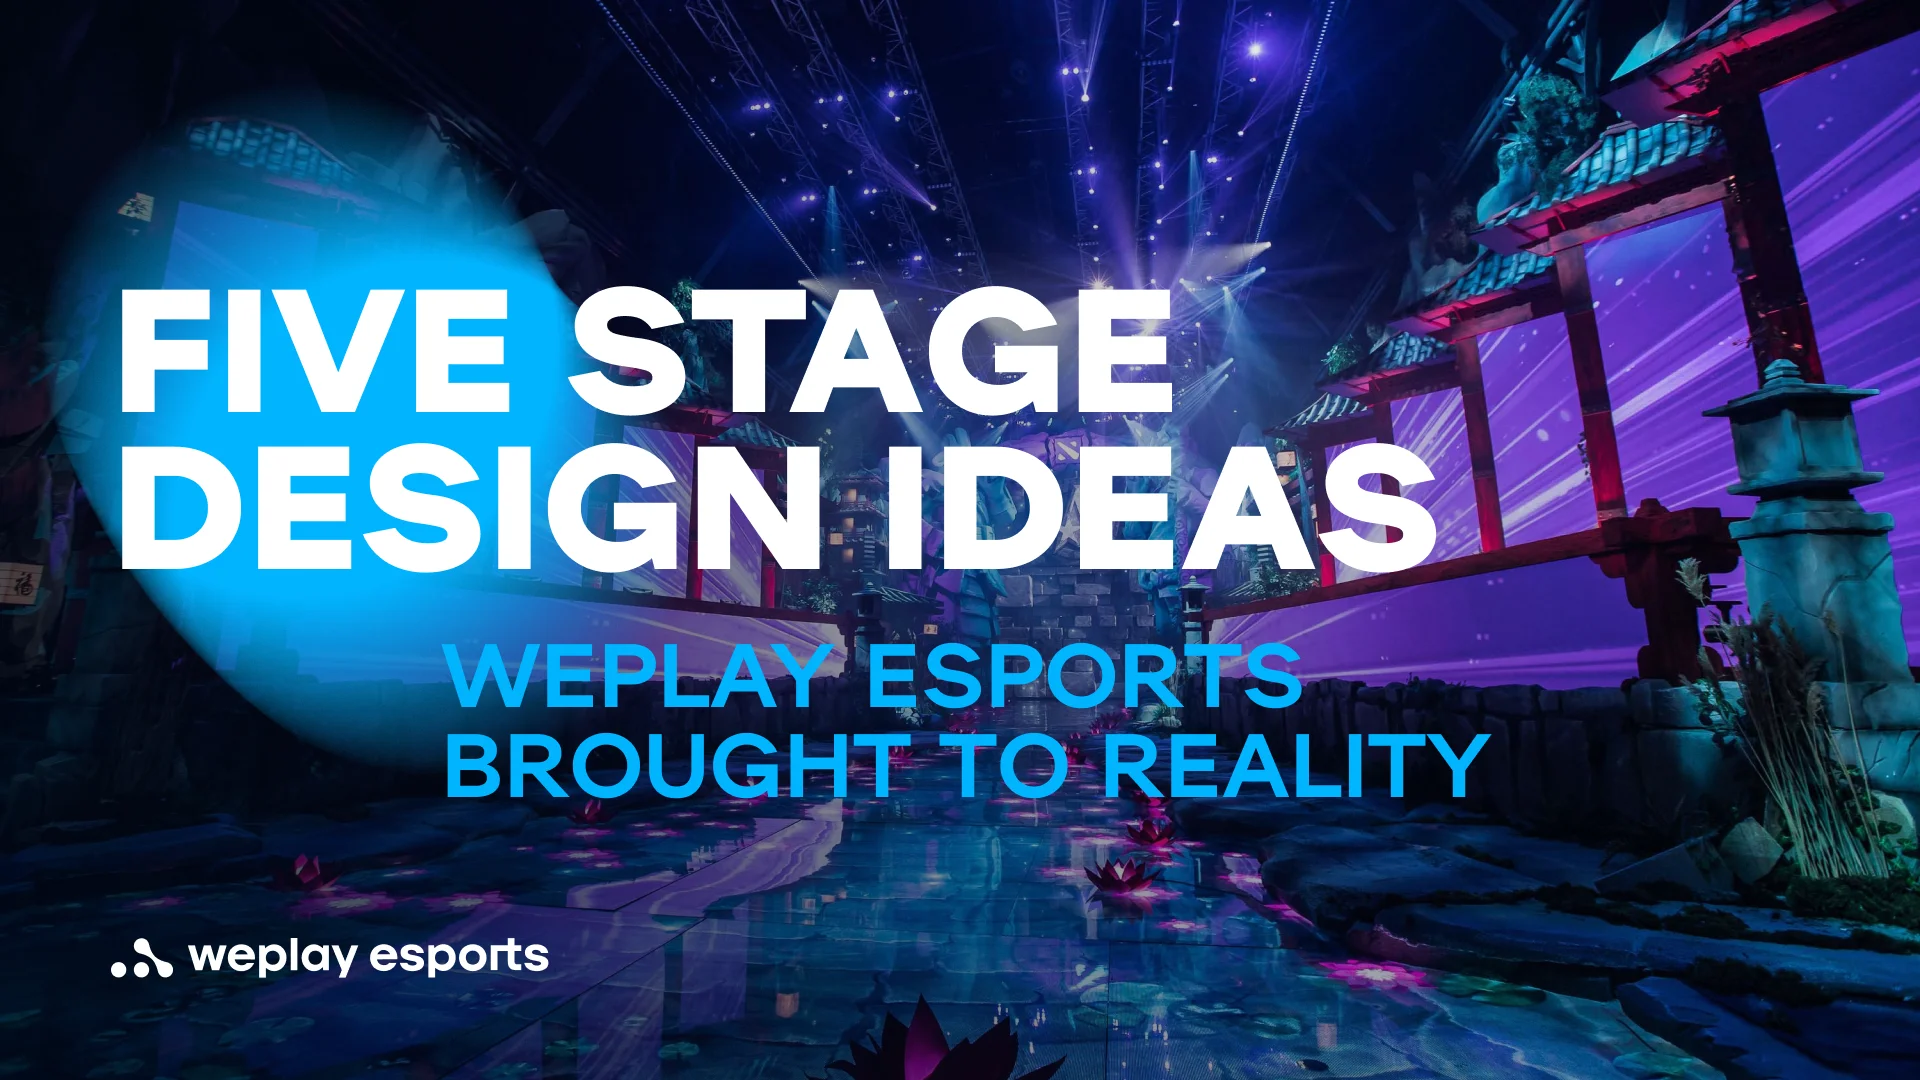 Five stage design ideas WePlay Esports brought to reality. Credit: WePlay Holding